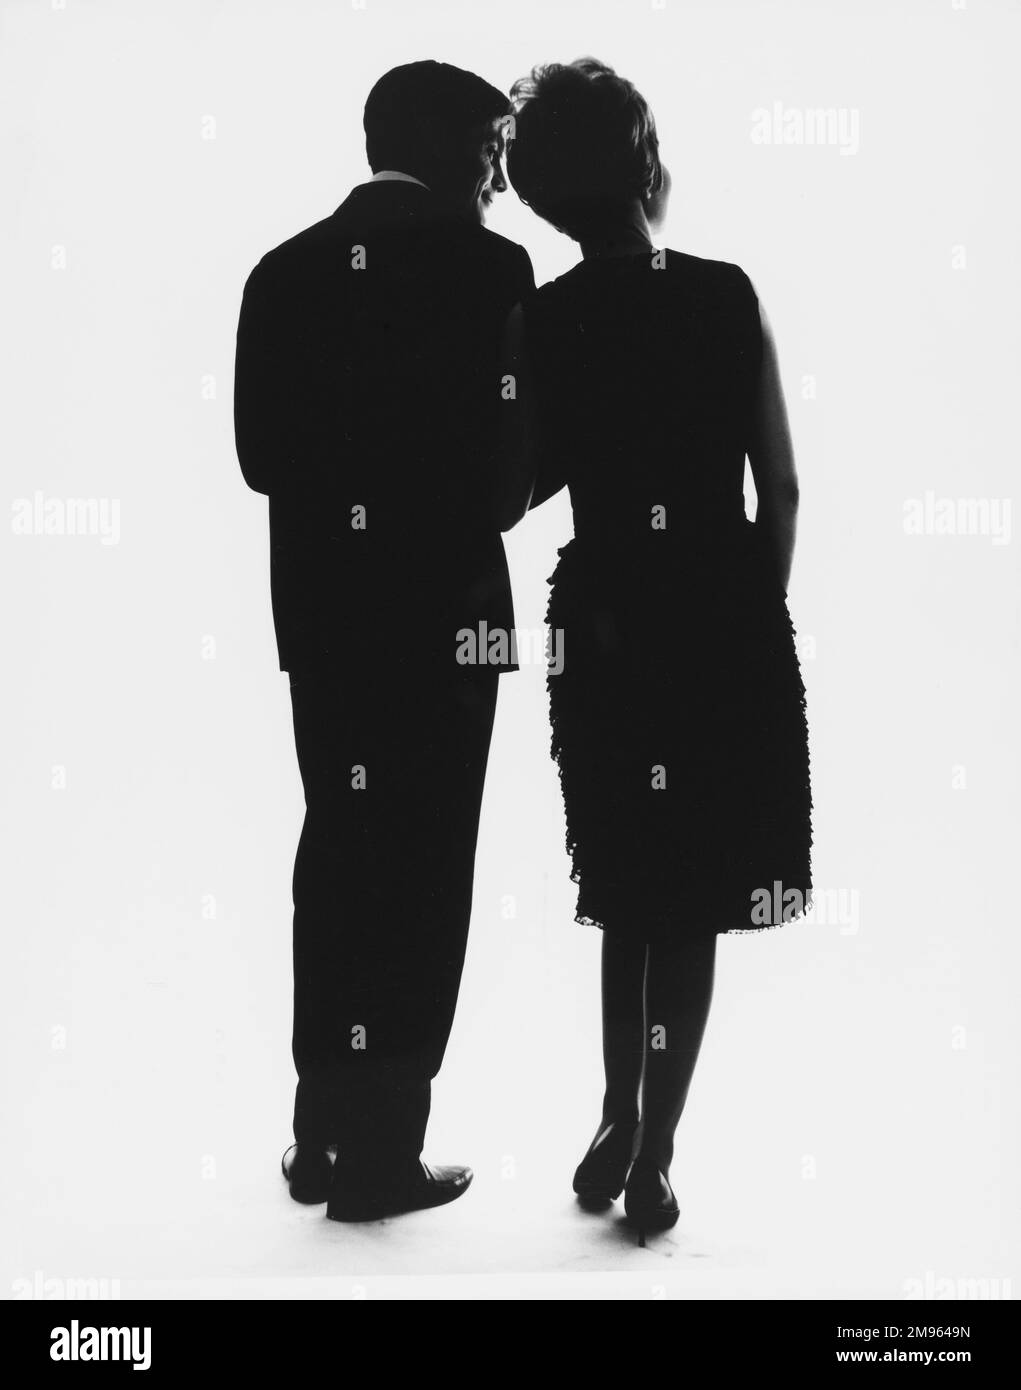 A silhouetted couple face away from the camera in evening apparel. Stock Photo